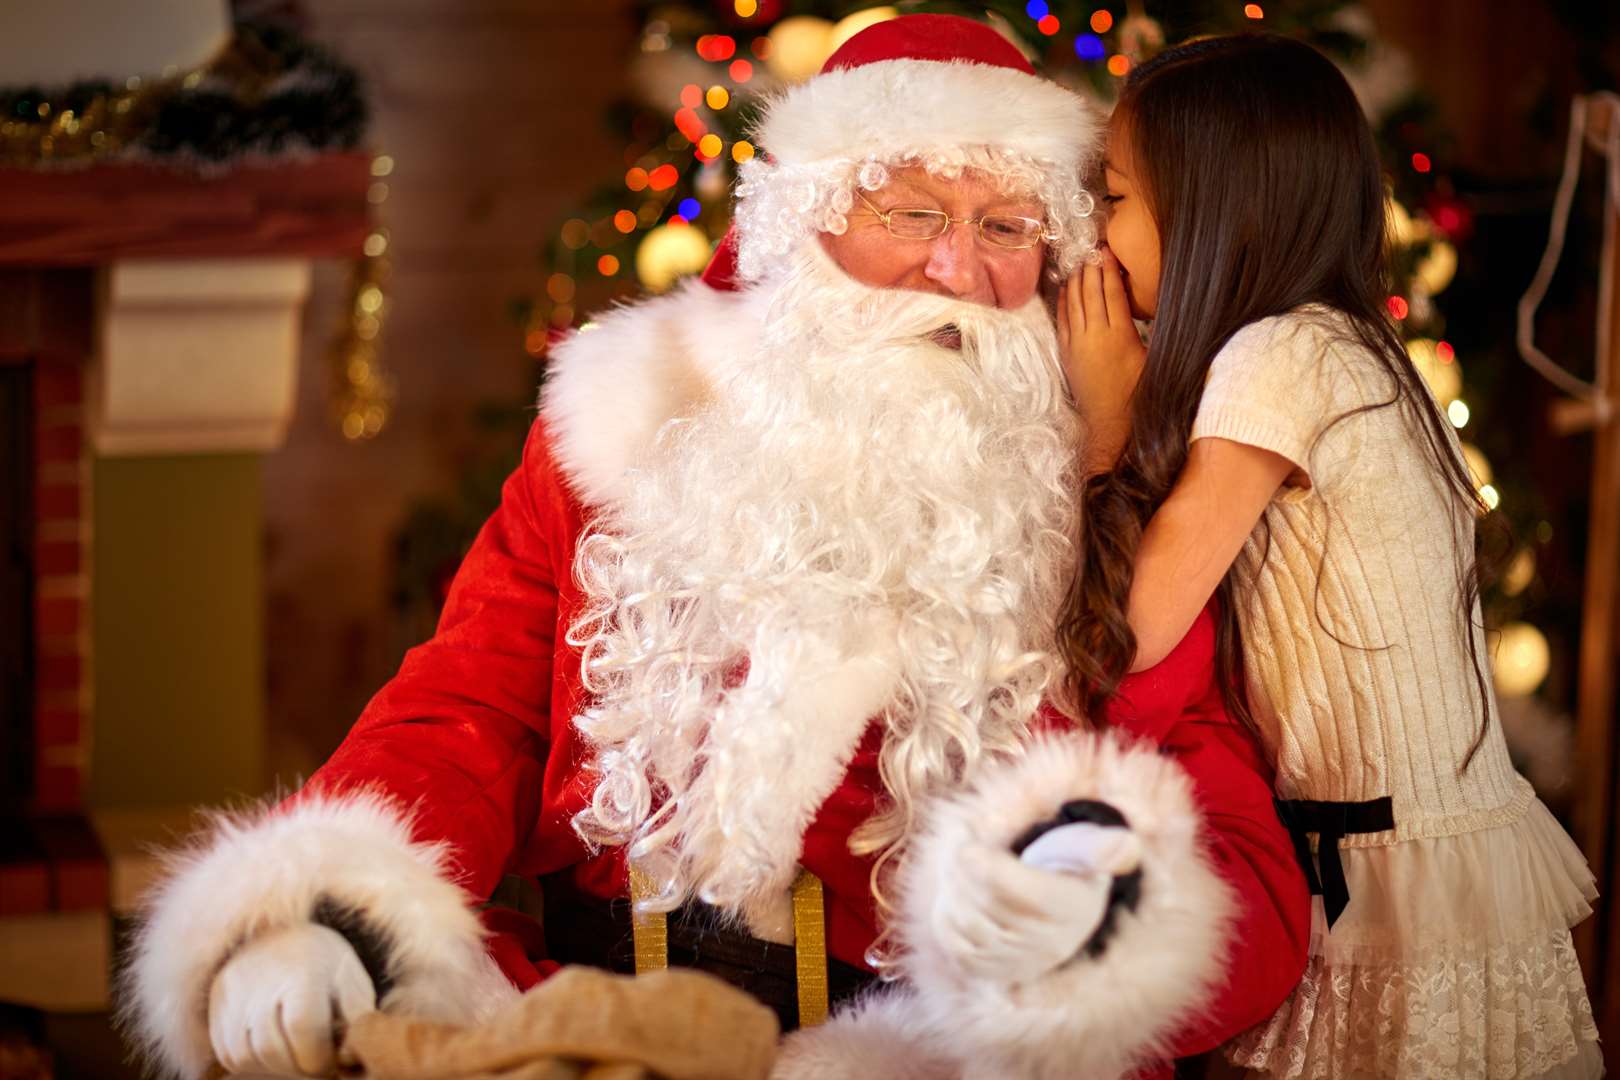 The Santa Experience takes place all weekend at Coolings Green & Pleasant